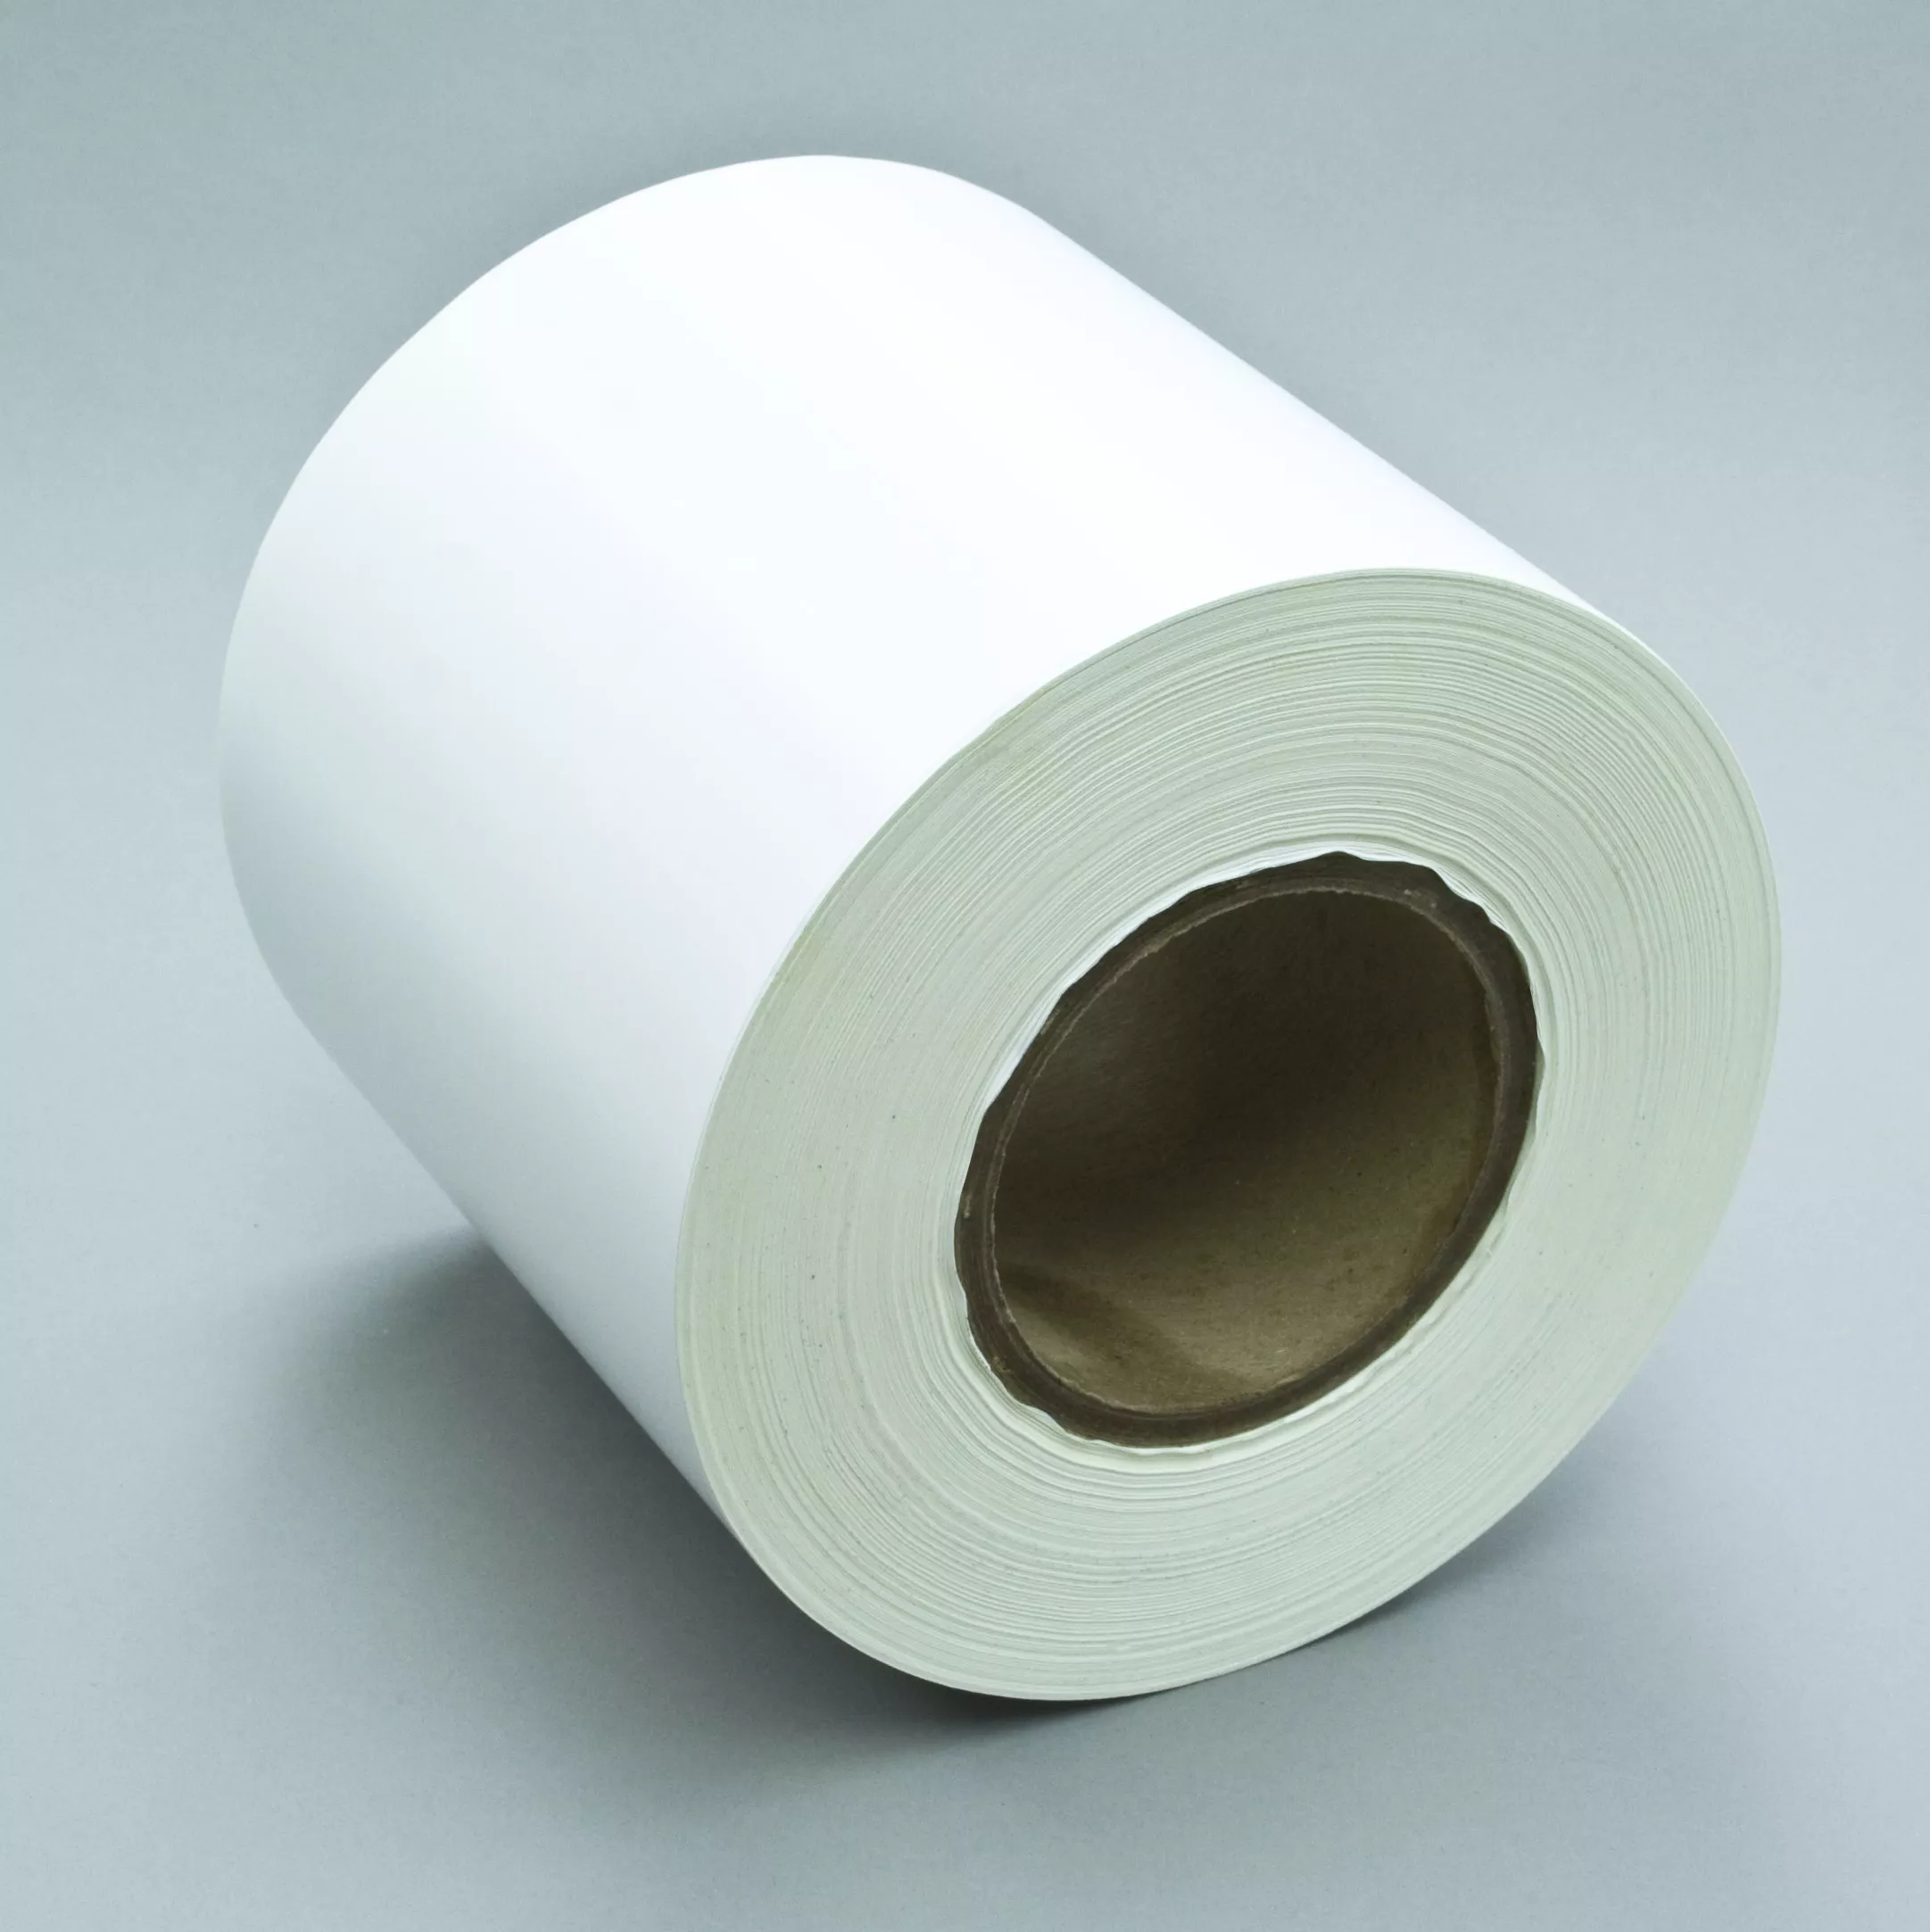 3M™ Sheet and Screen Label Material 7051SA, Soft White EL Vinyl, 54 in x
750 ft, 1 Roll/Case